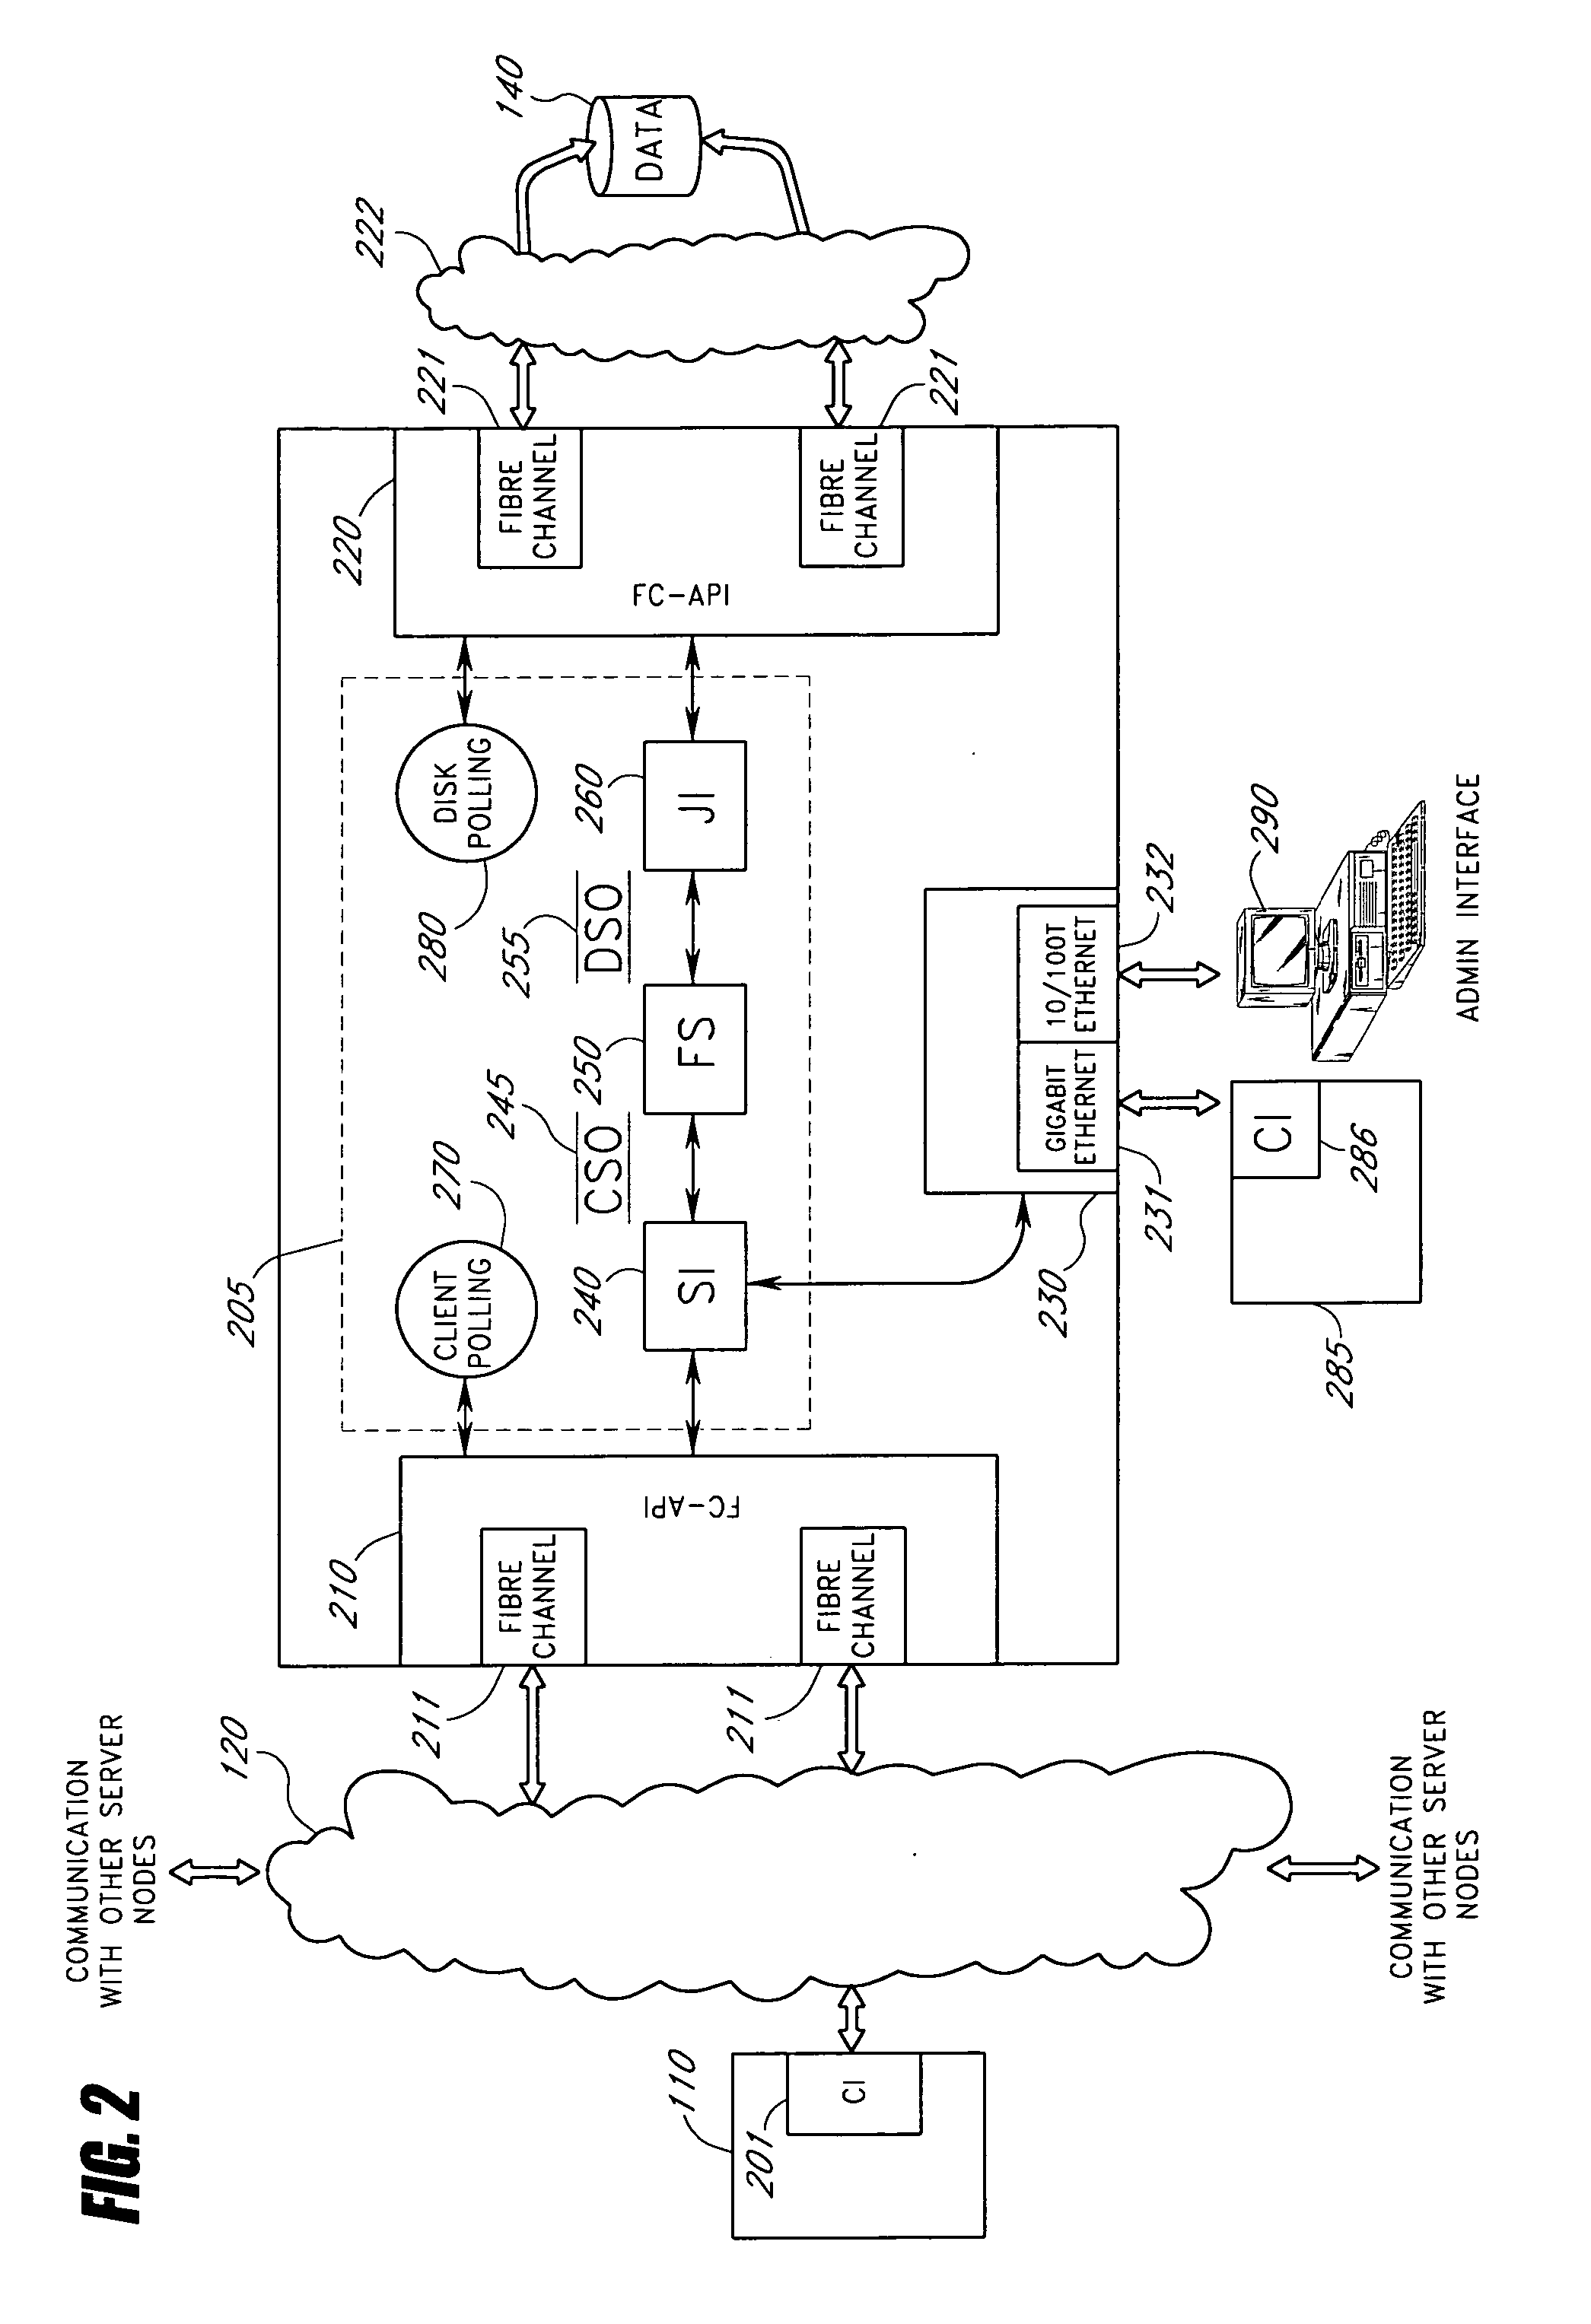 Directory information for managing data in network file system